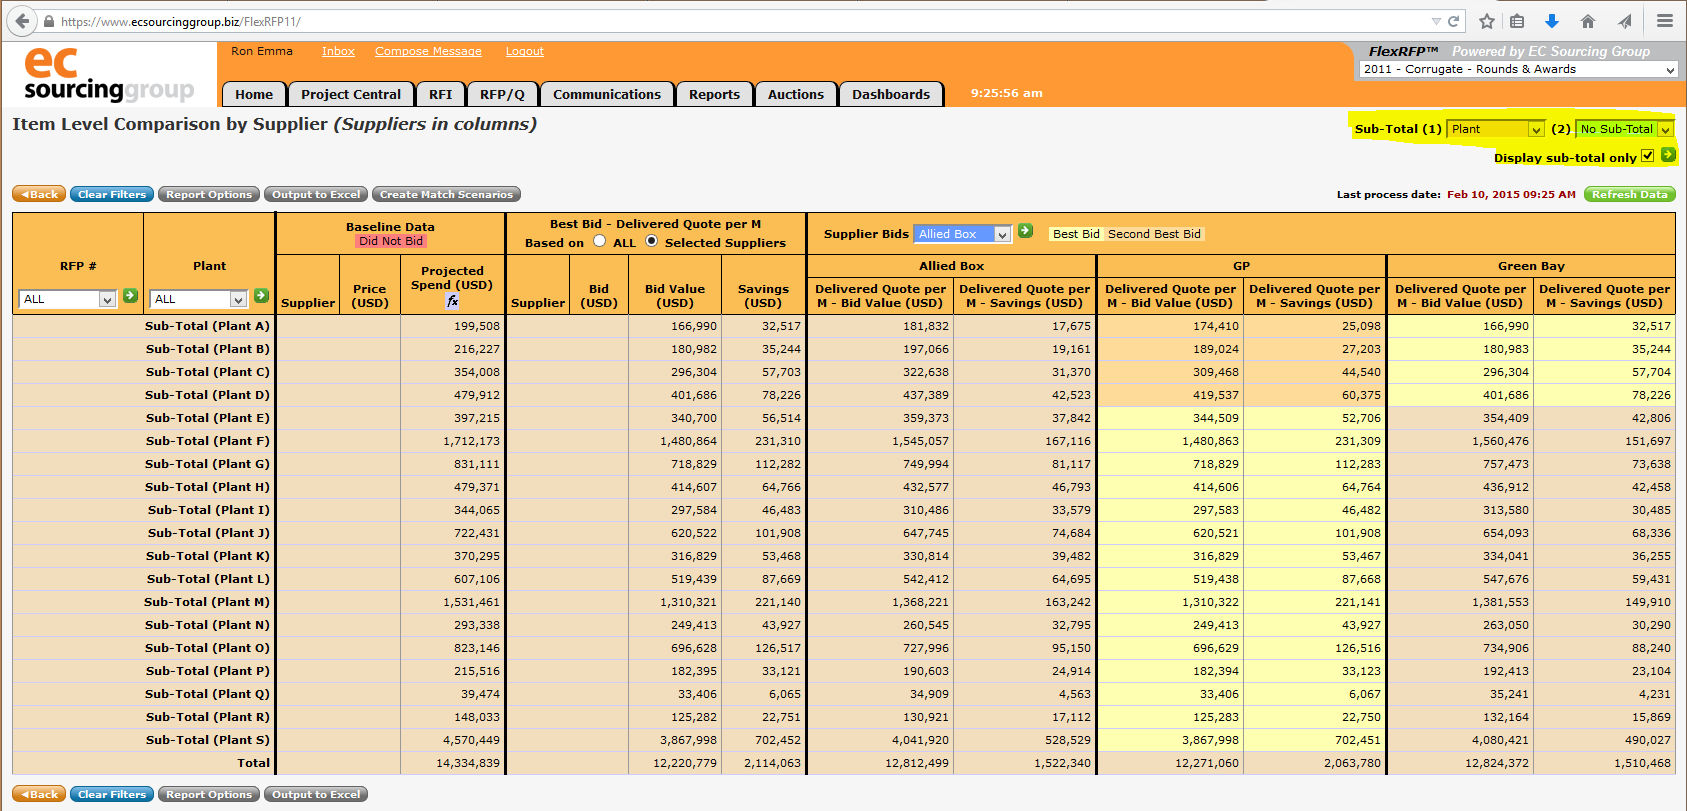 Bid Analysis Report in Subtotal Only View